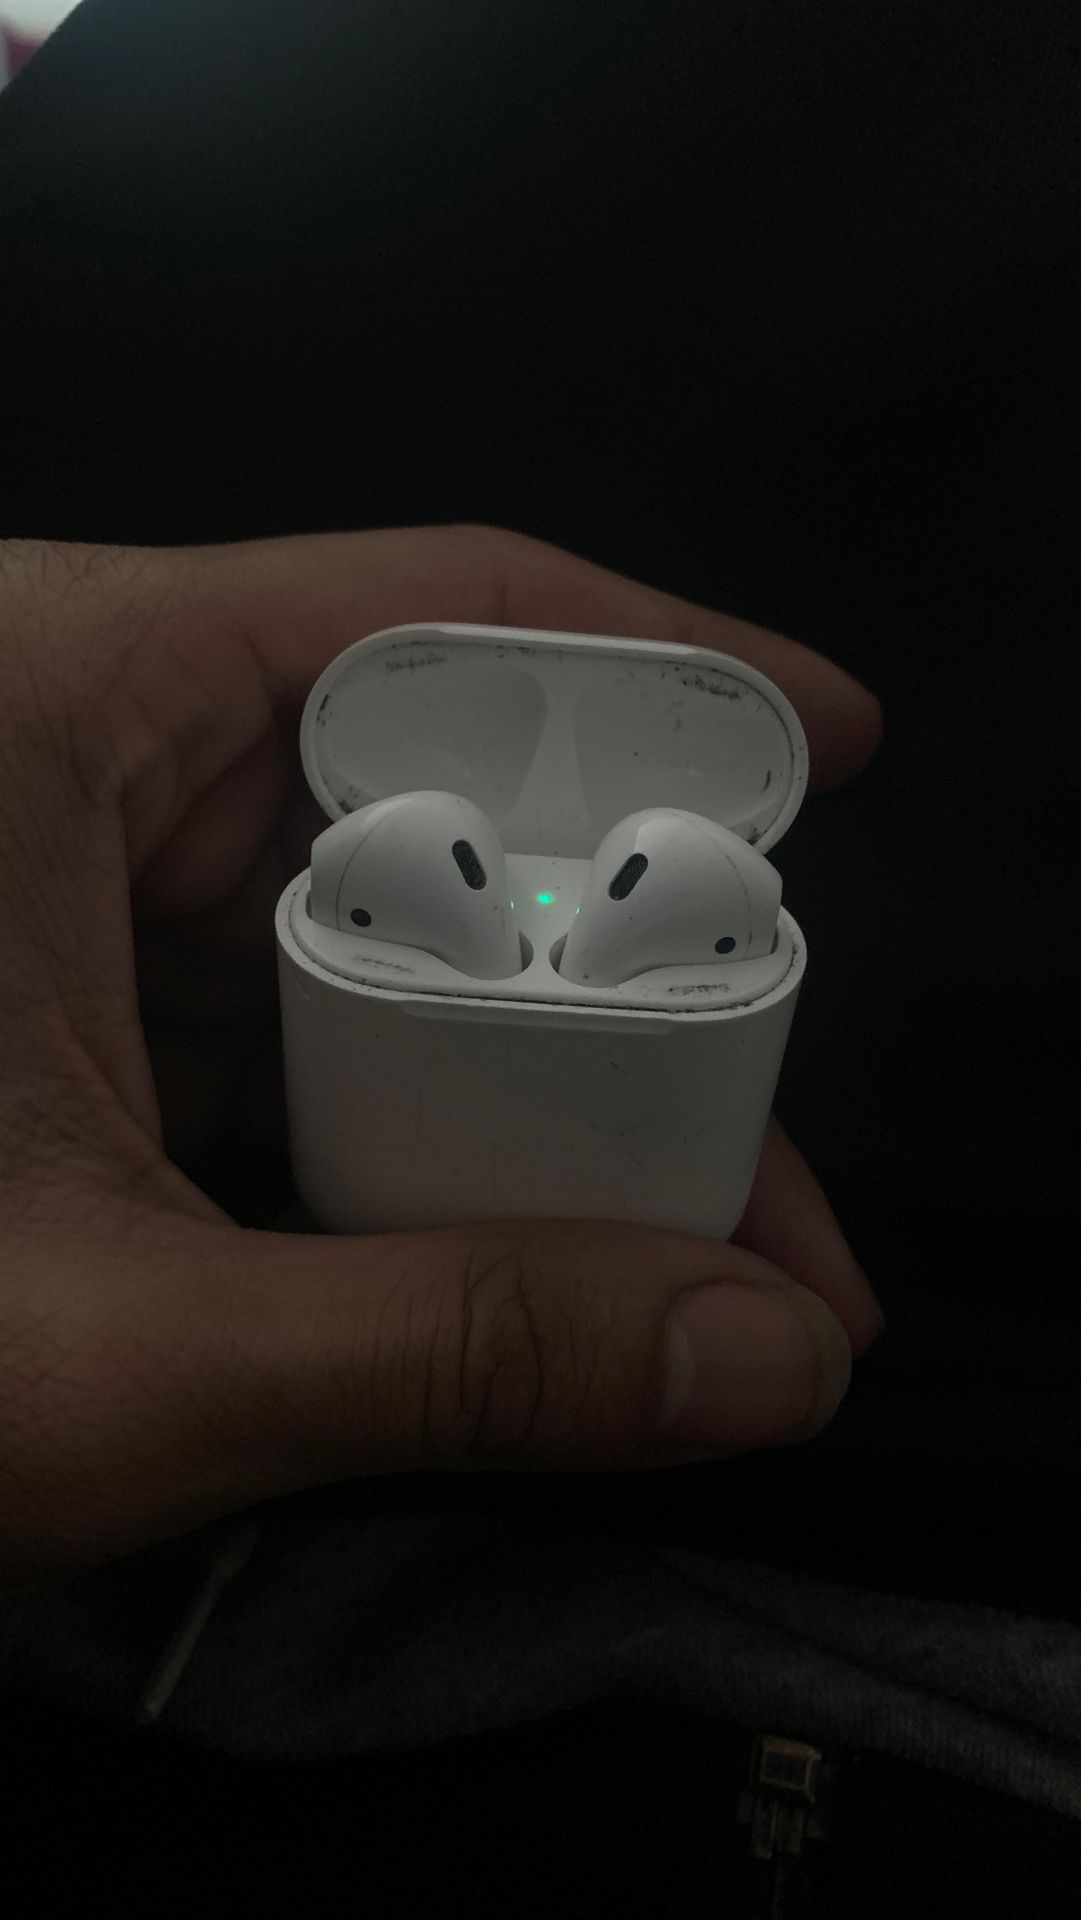 New air pods got them a week ago price is negotiable